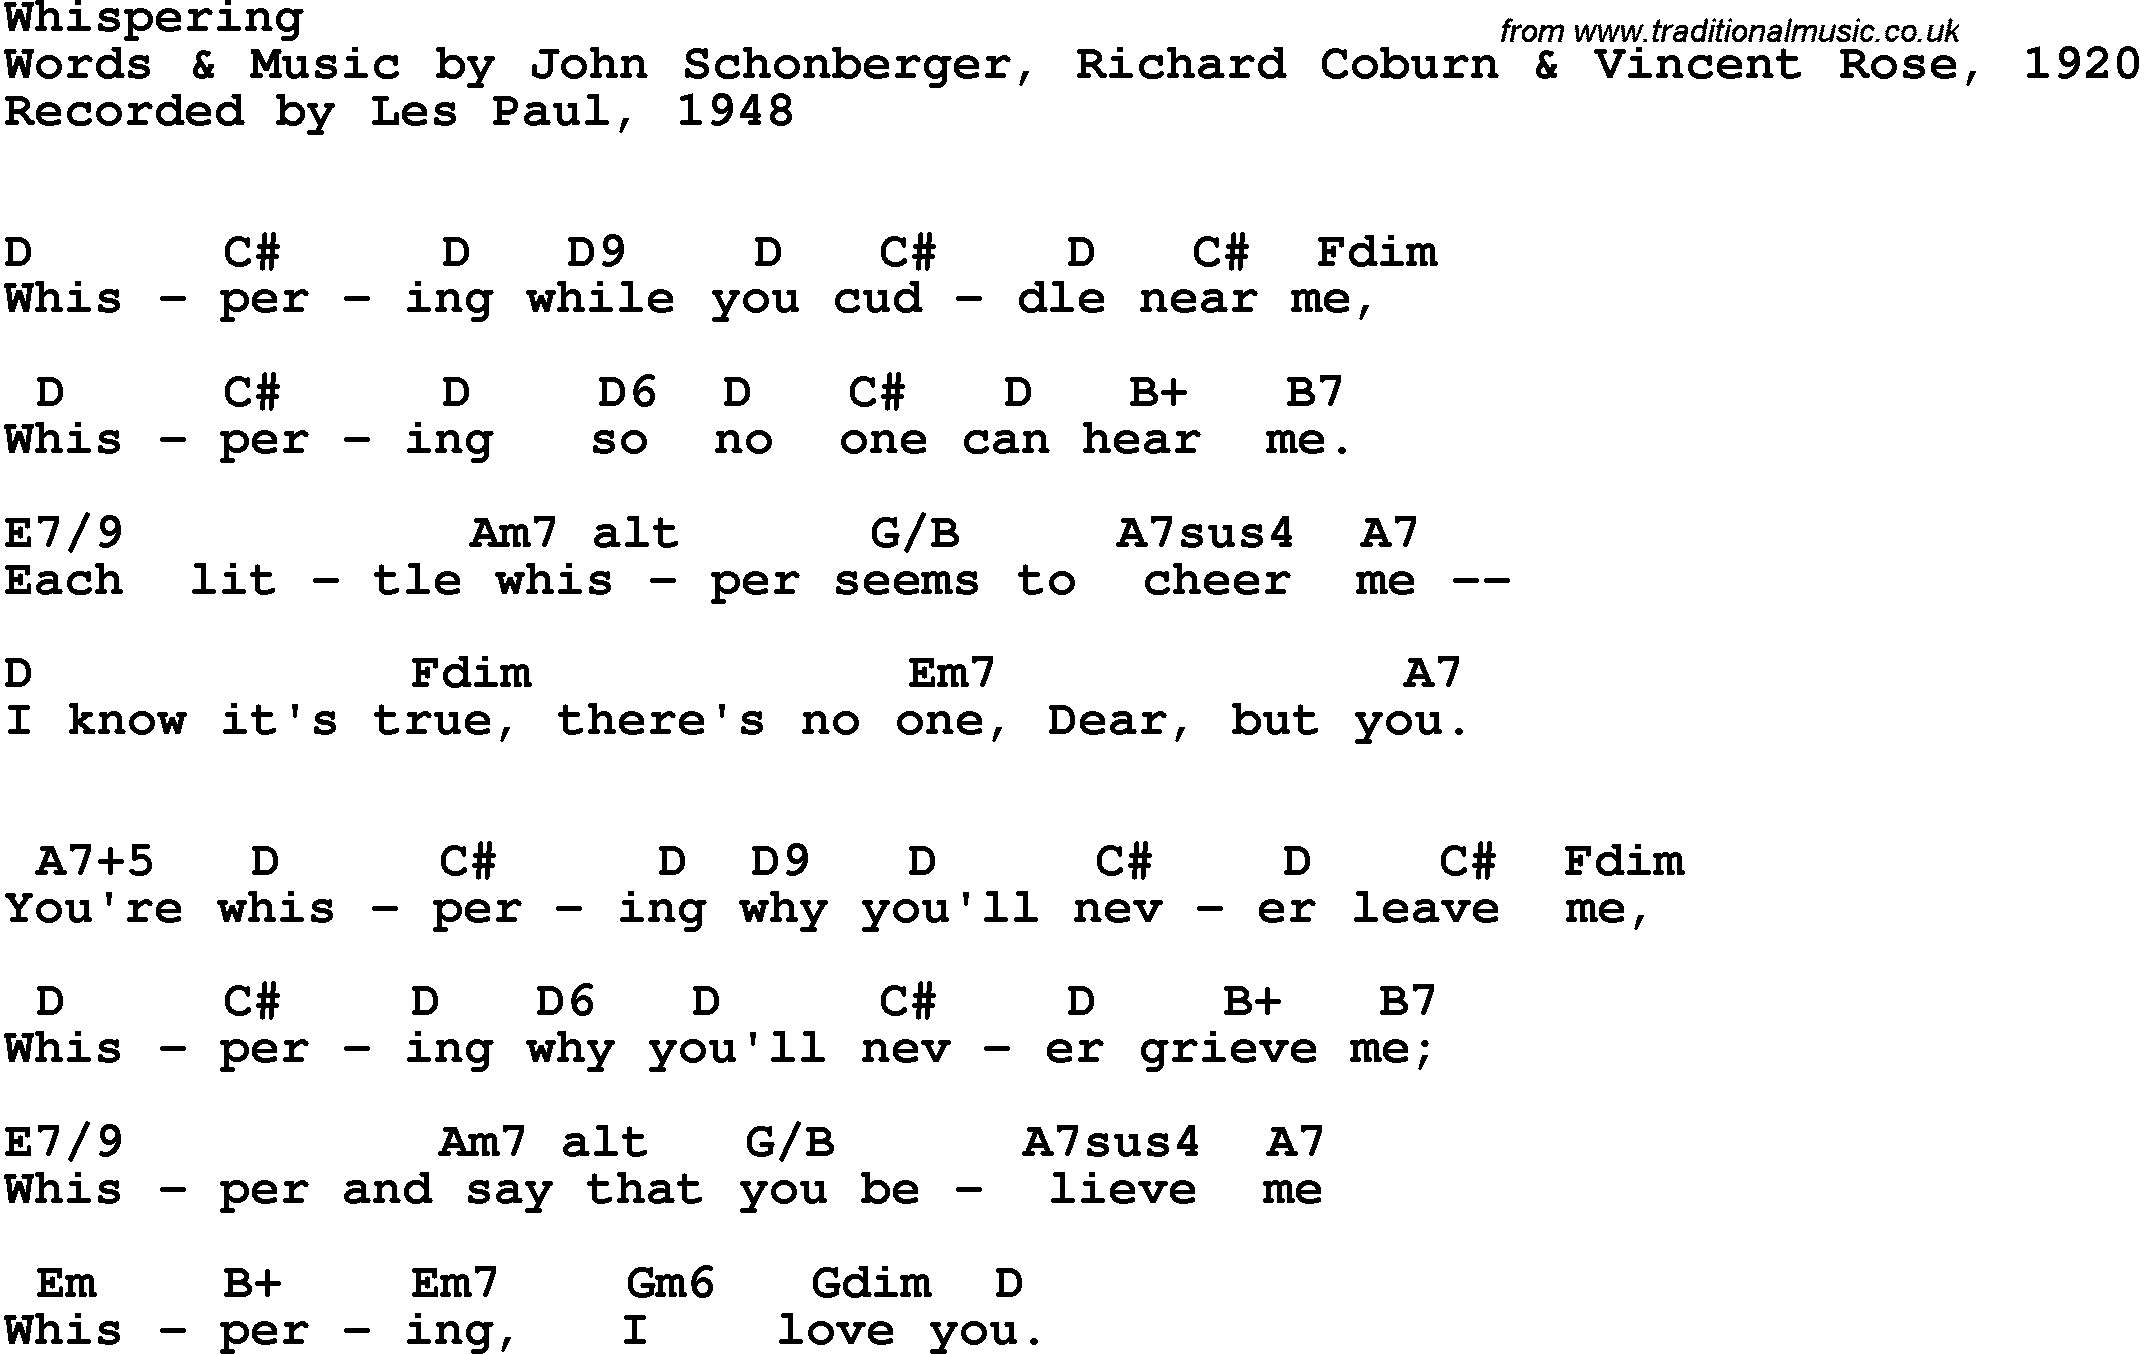 Song Lyrics with guitar chords for Whispering - Les Paul, 1948